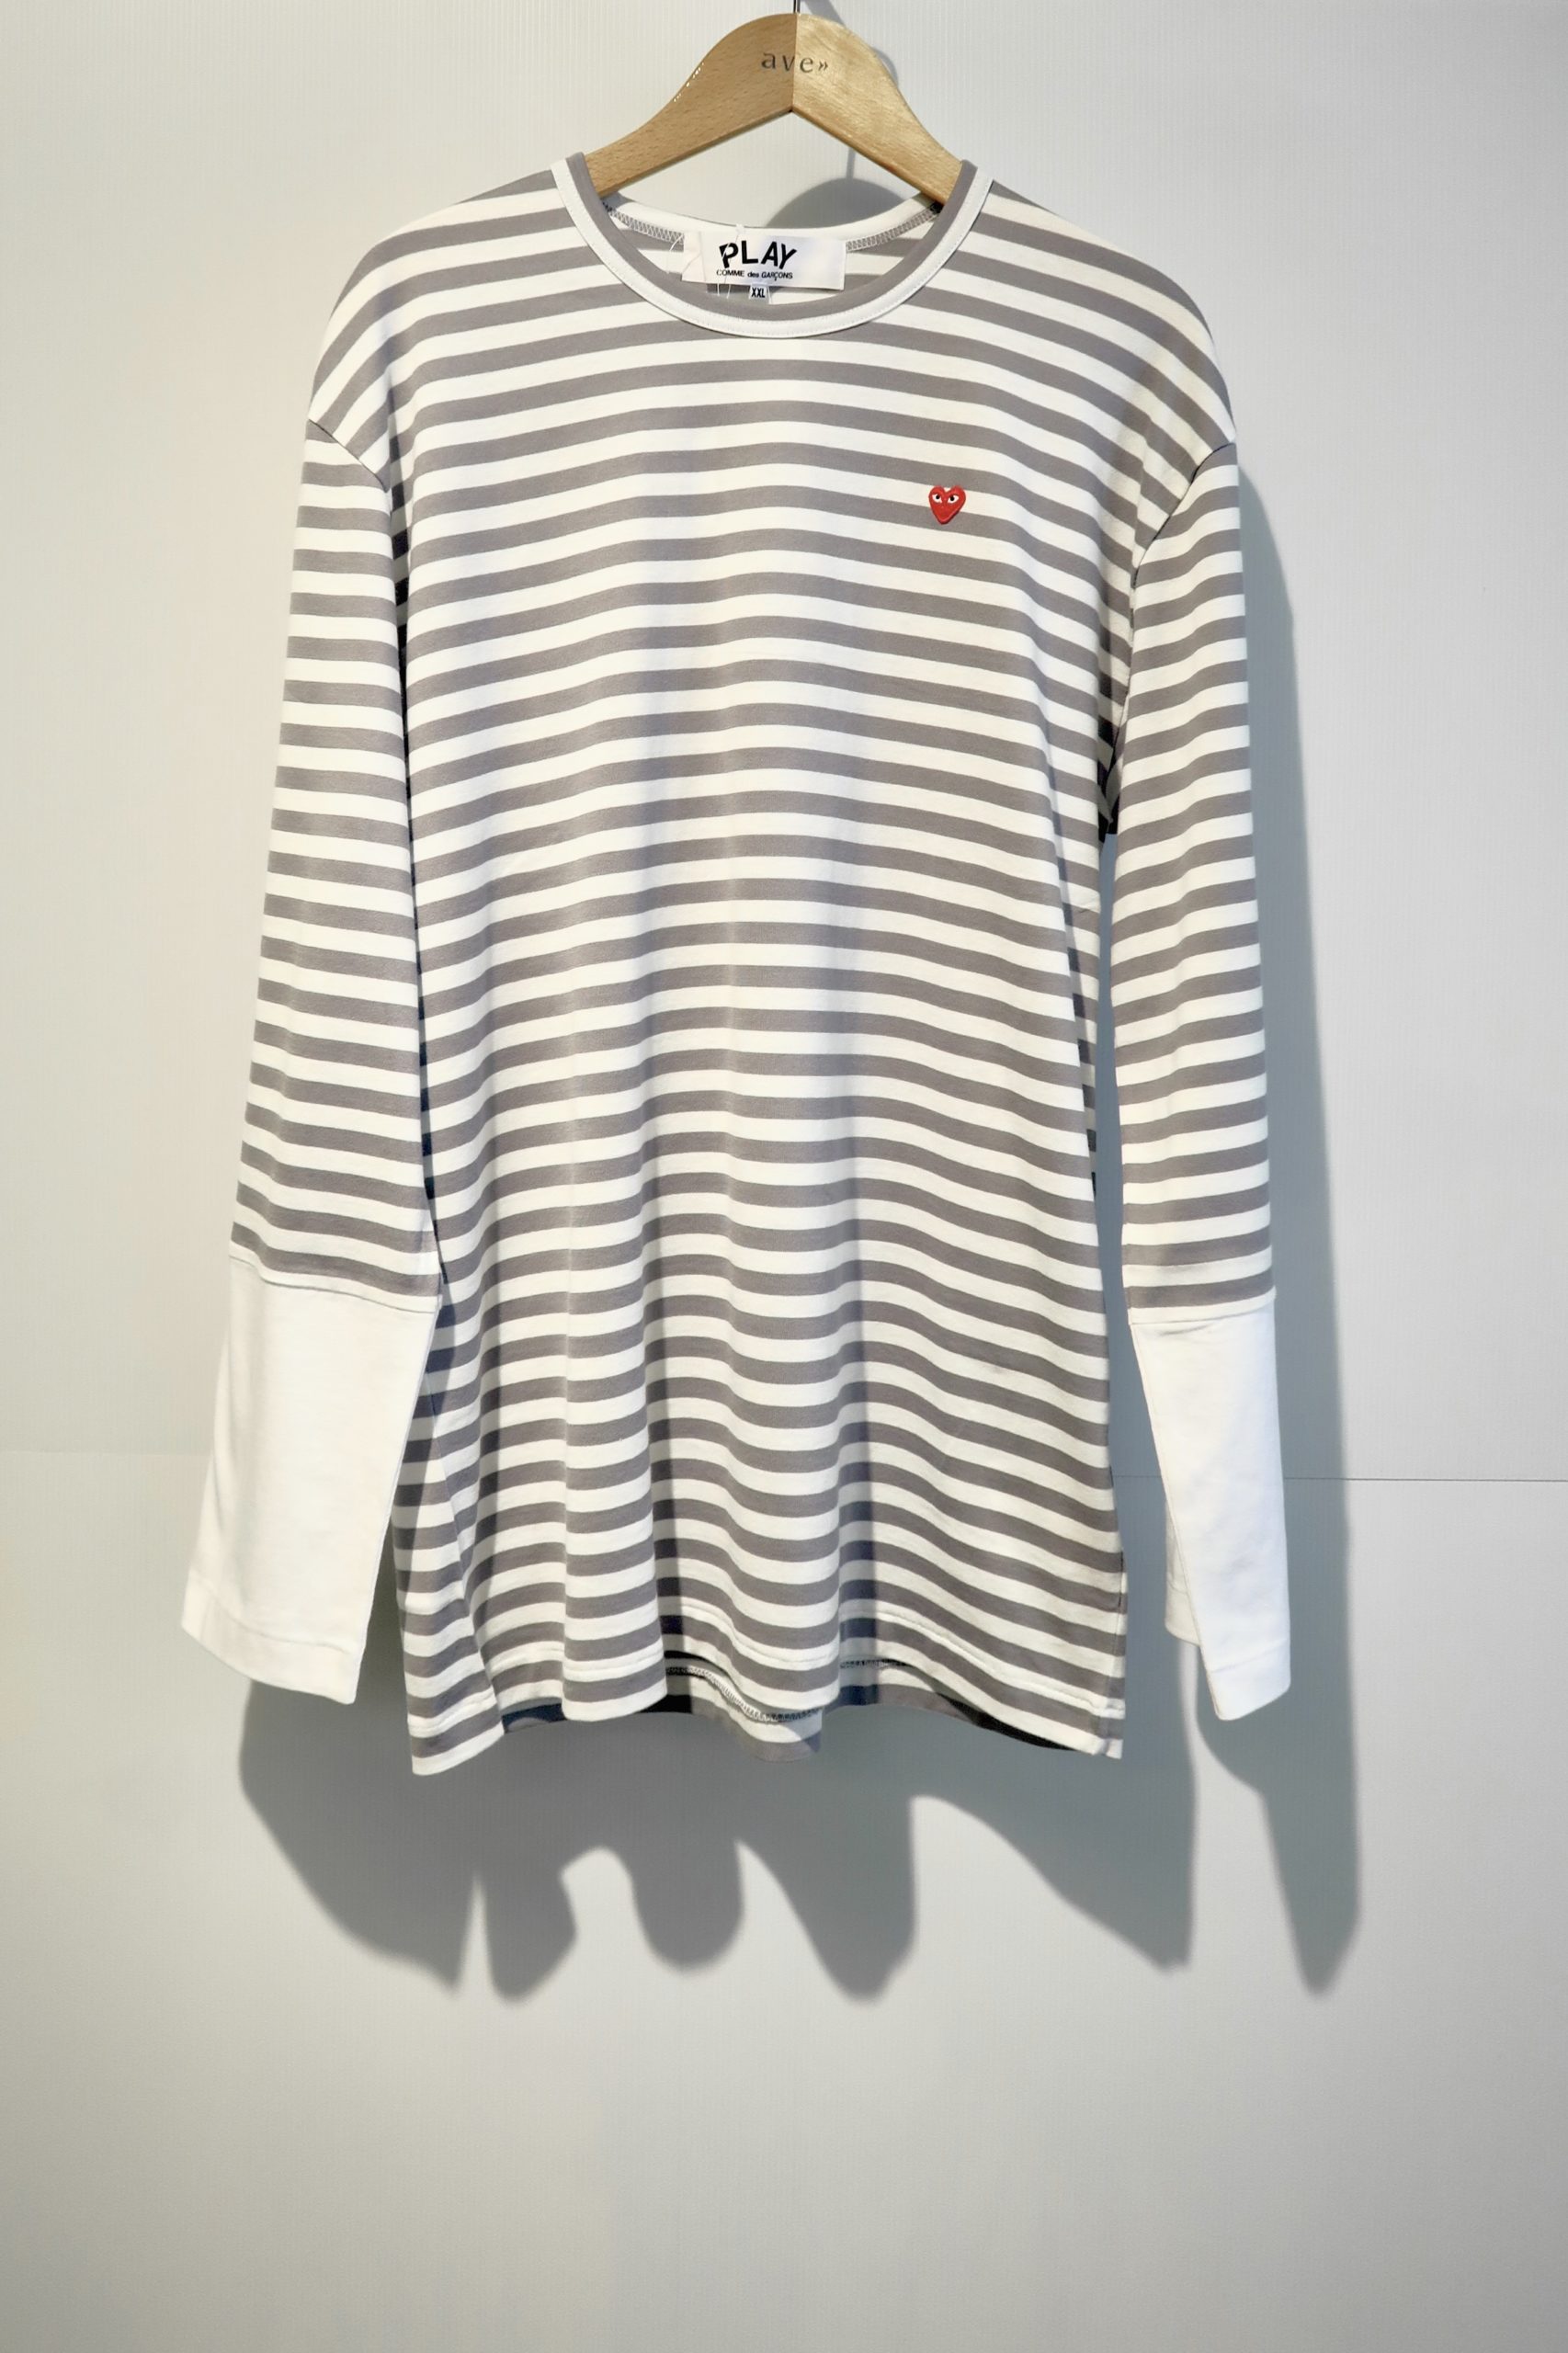 COMME DES GARCONS PLAY P1T320 LONGSLEEVE STRIPED grey/white - ave ...